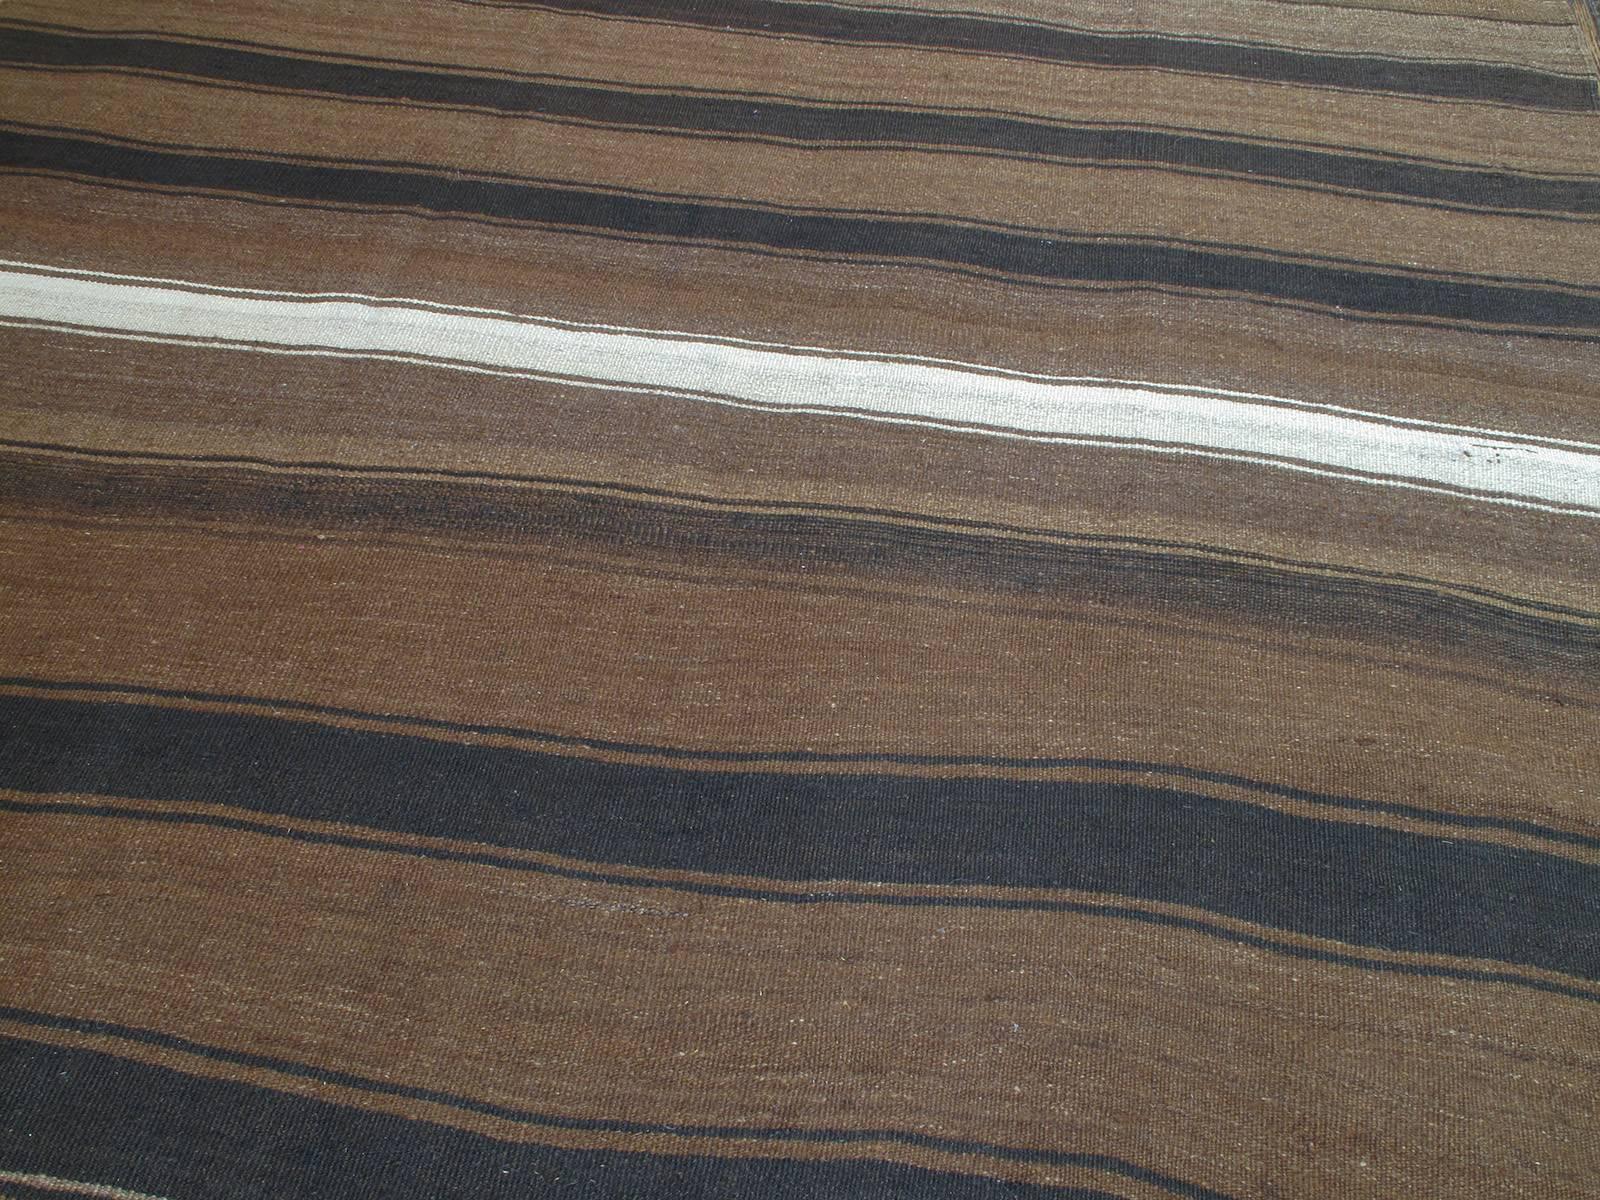 Hand-Woven Kilim Rug with Wavy Bands